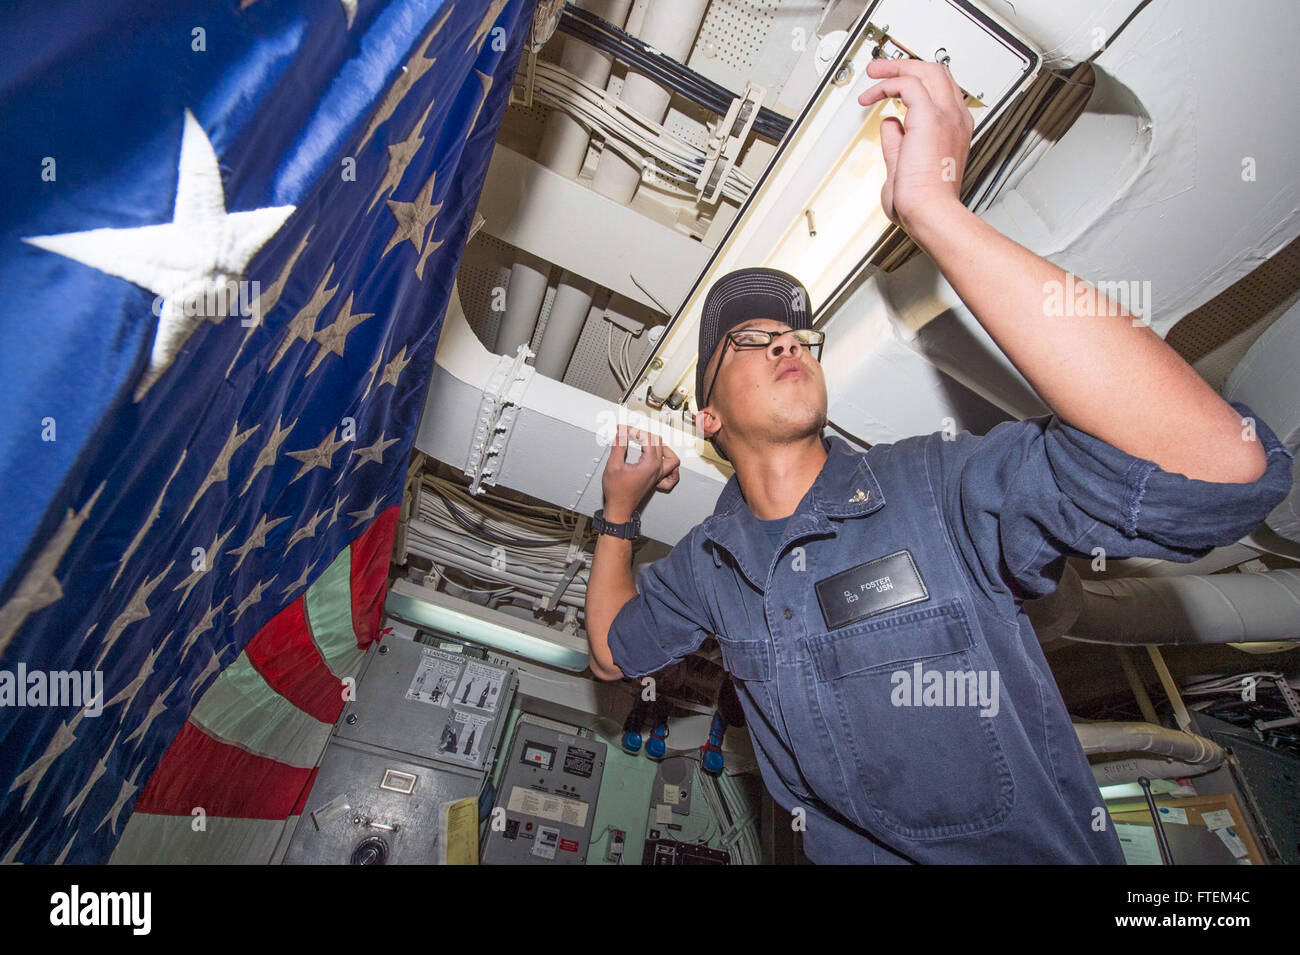 ATLANTIC OCEAN (Feb. 22, 2015) Interior Communications Electrician 3rd Class Quinton Foster, from Grays Creek, Illinois, repairs an overhead light aboard USS Laboon (DDG 58) Feb. 22, 2015. Laboon, an Arleigh Burke-class guided-missile destroyer home ported in Norfolk, is conducting naval operations in the U.S. 6th Fleet area of operations in support of U.S. national security interests in Europe. Stock Photo